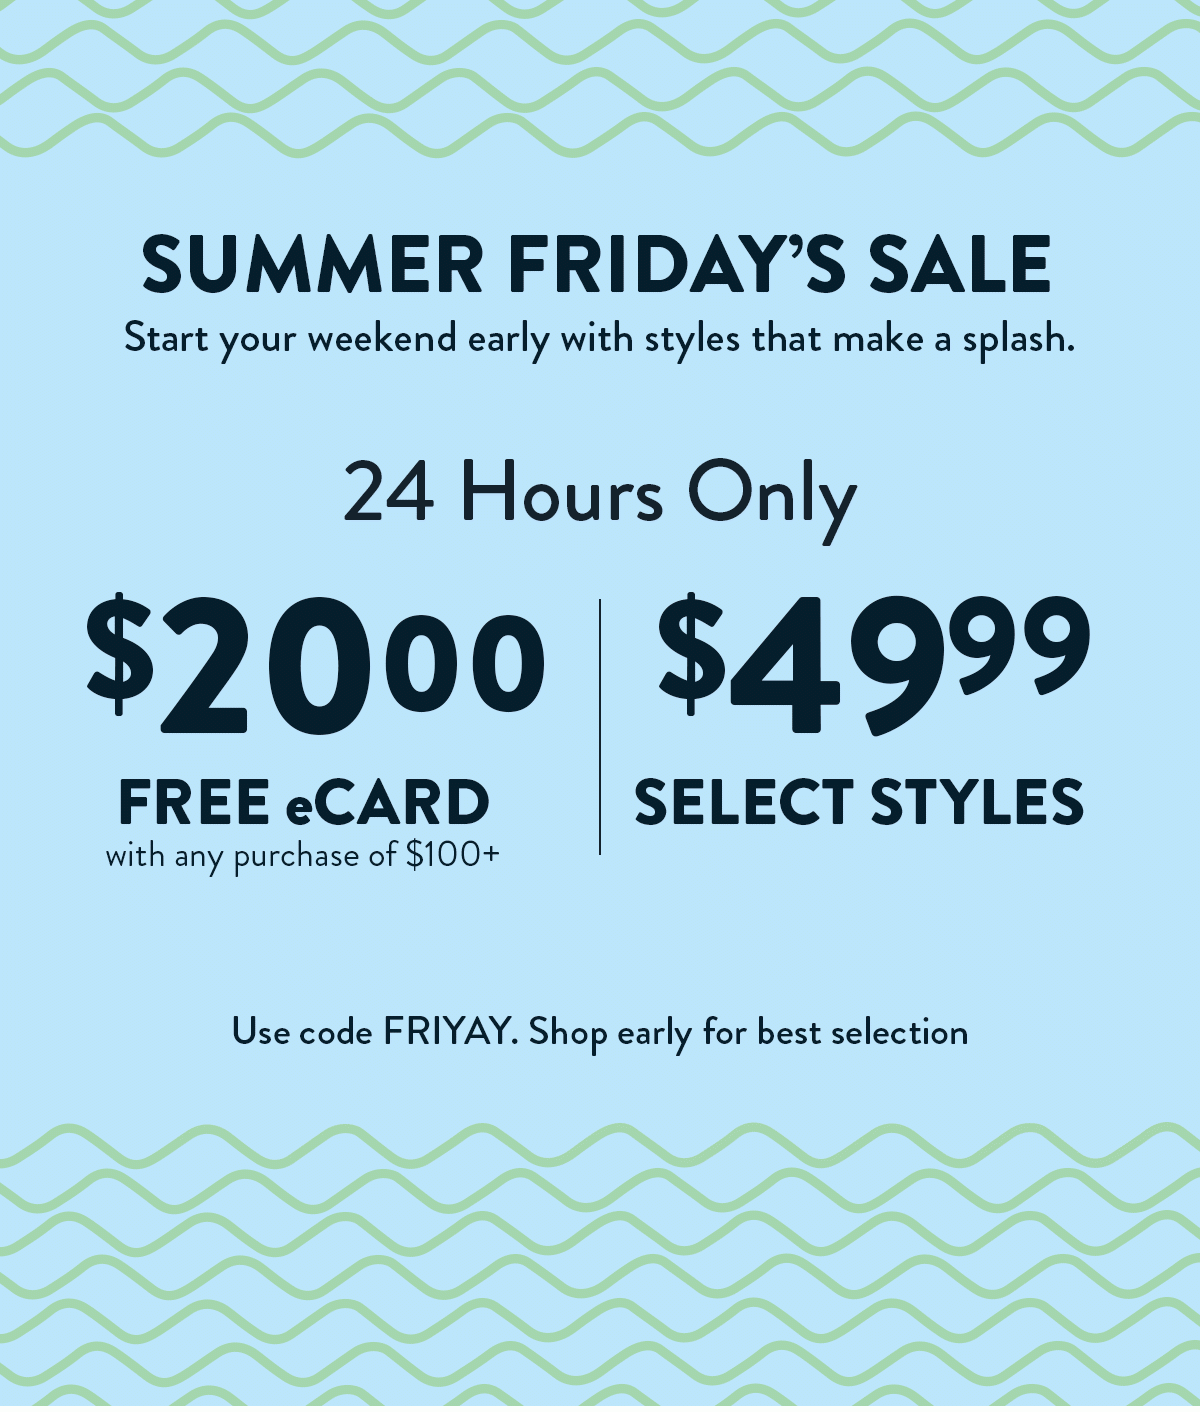 Summer Friday's Sale. 24 Hours Only. $20 eCard FREE with any purchase of $100+. $49.99 Select Styles. Use code FRIYAY. Shop early for best selection.